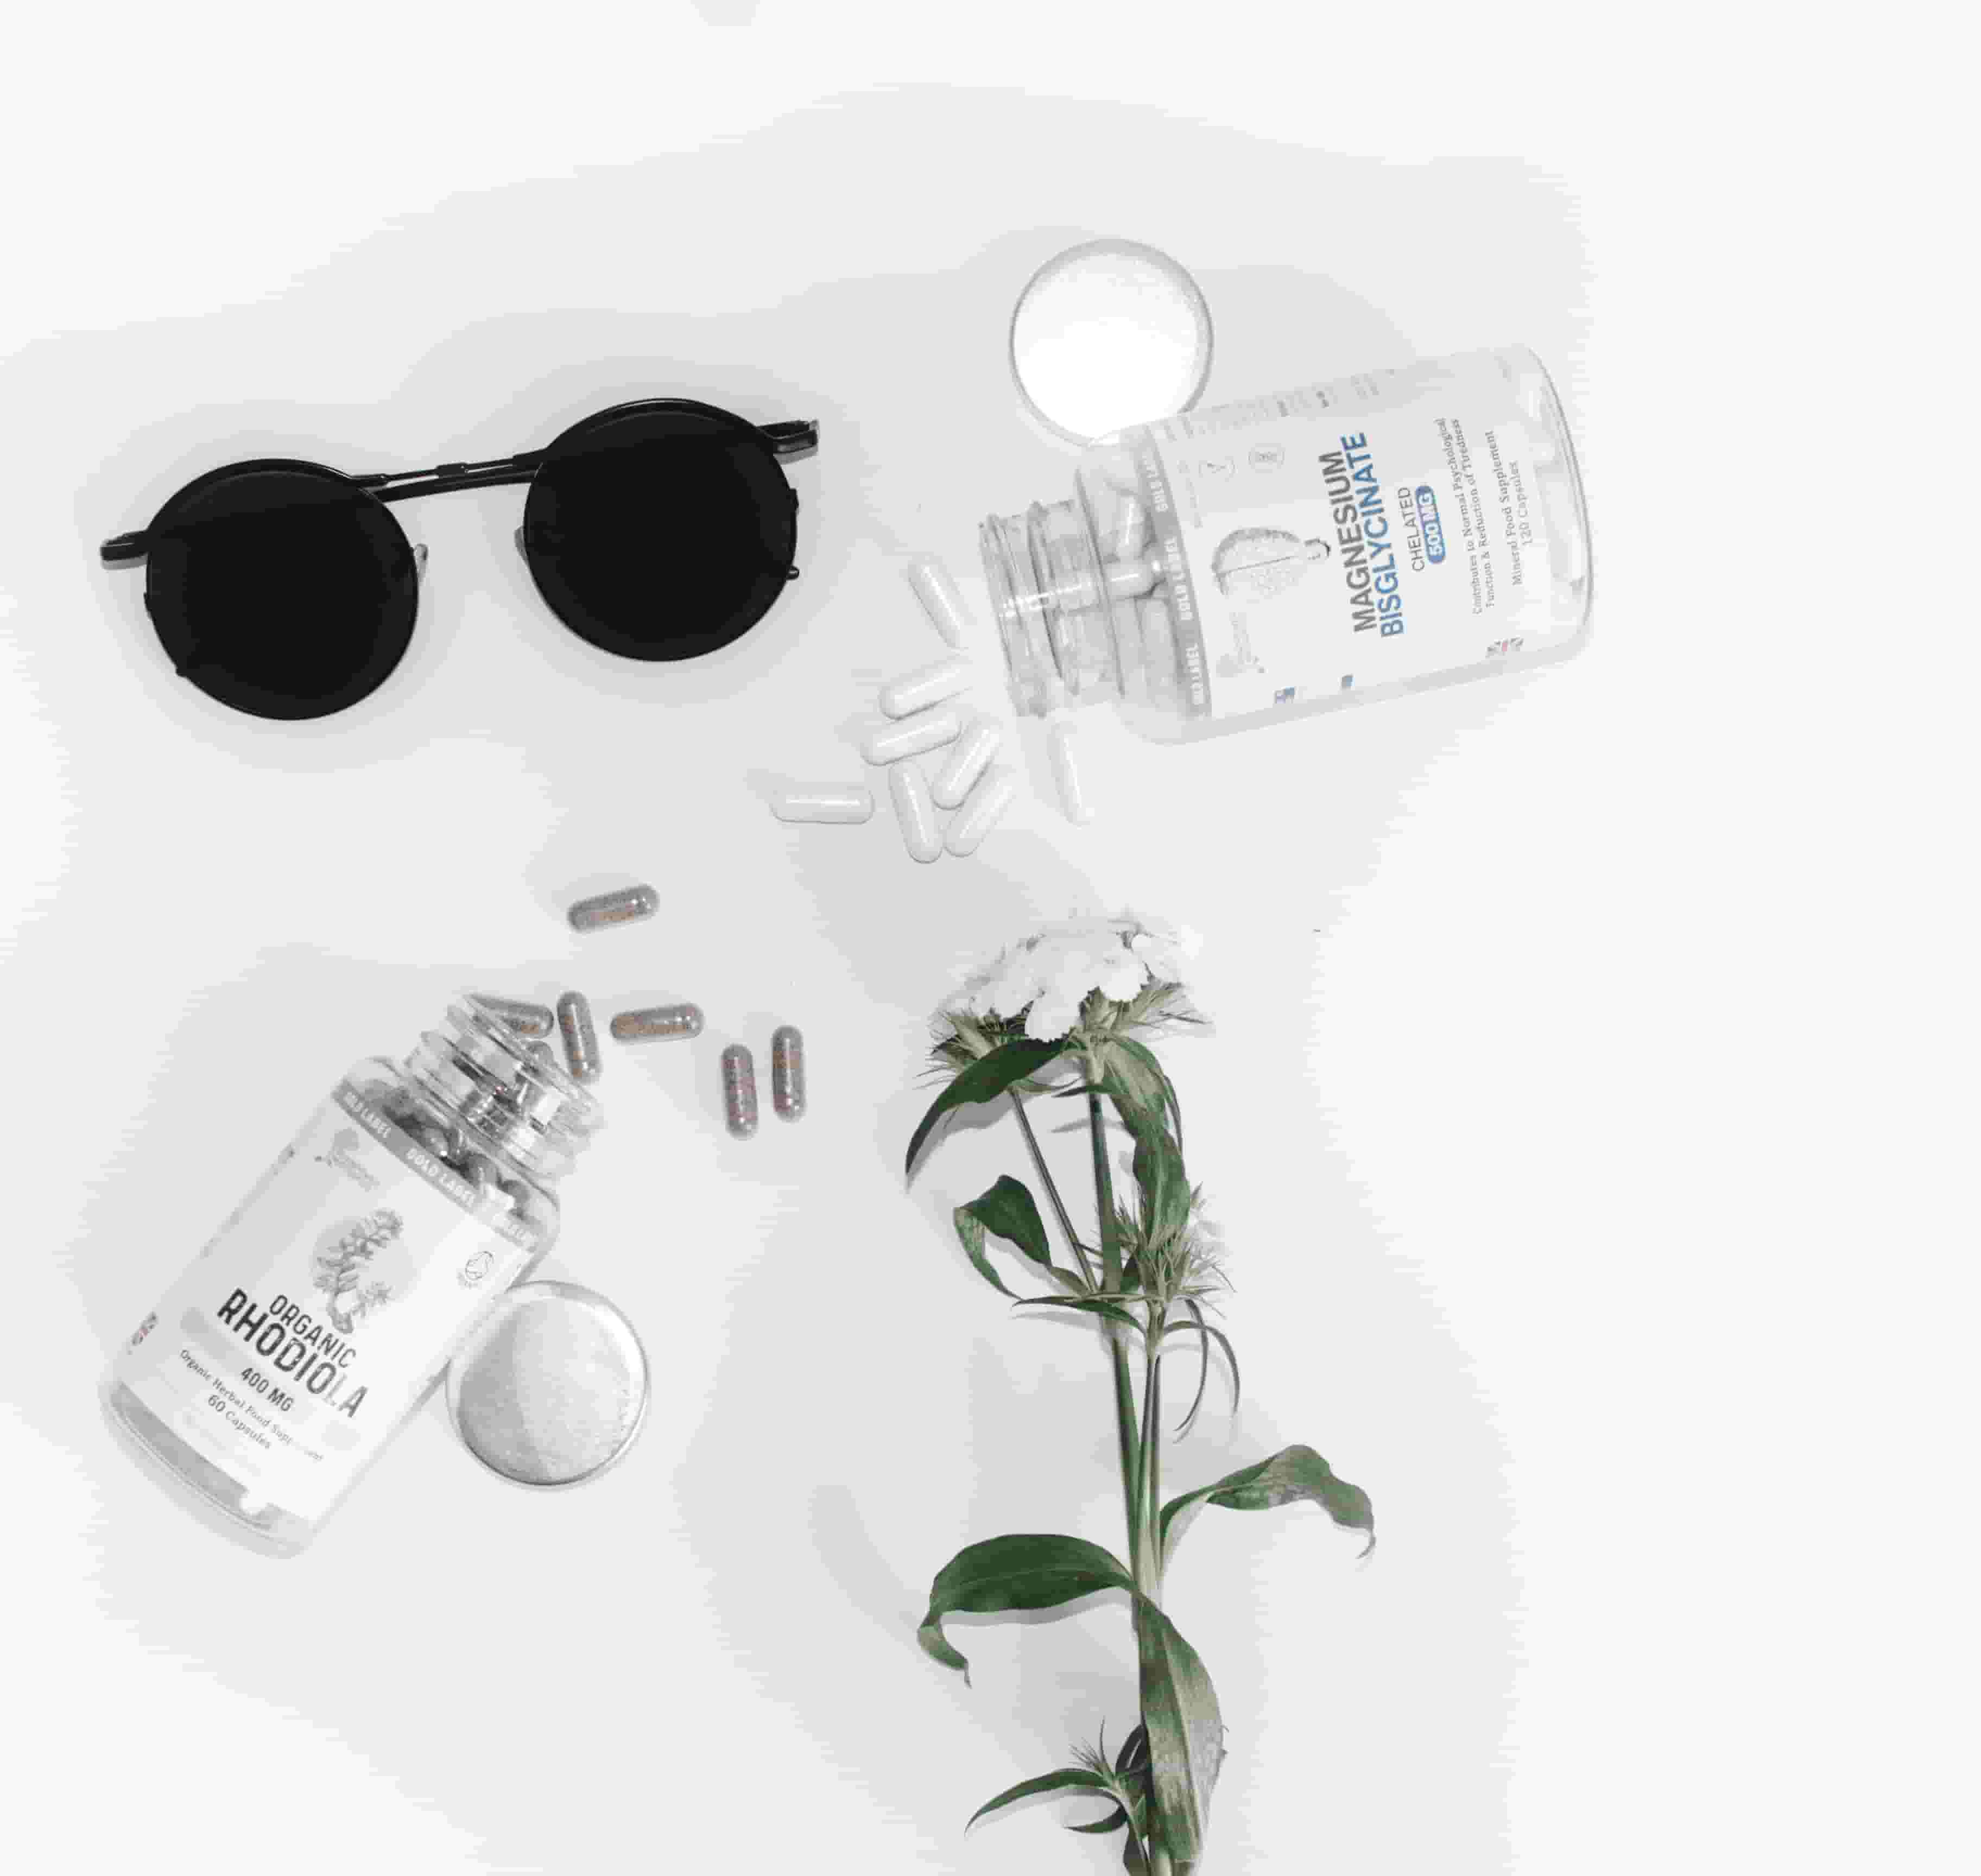 An instragram-style image, with supplements, flowers and trendy sunglasses